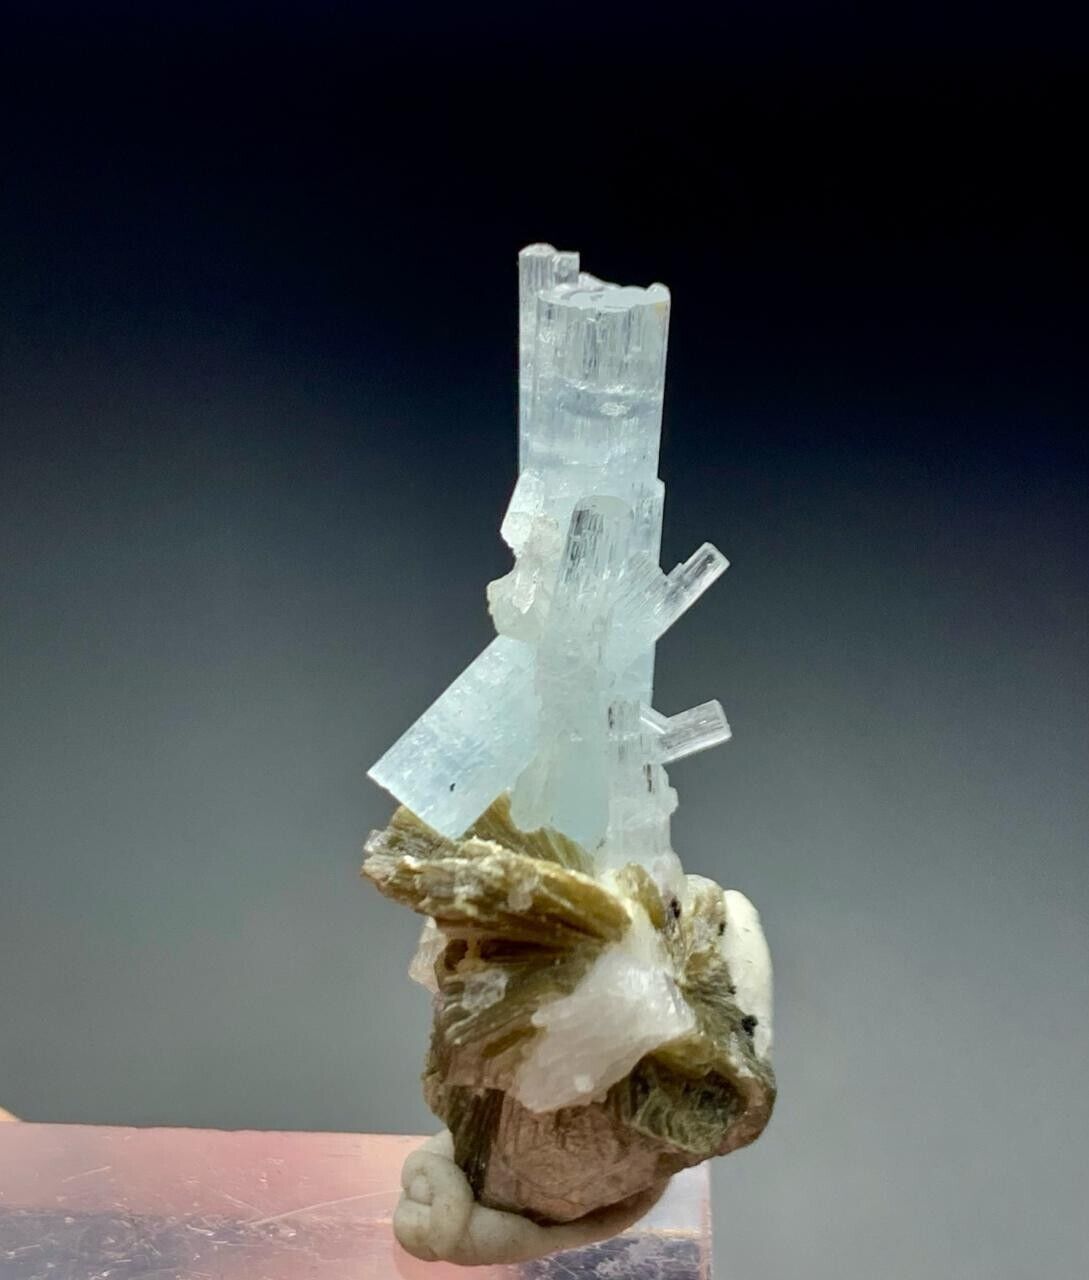 23 Cts Terminated Aquamarine Crystals Bunch from Skardu Pakistan